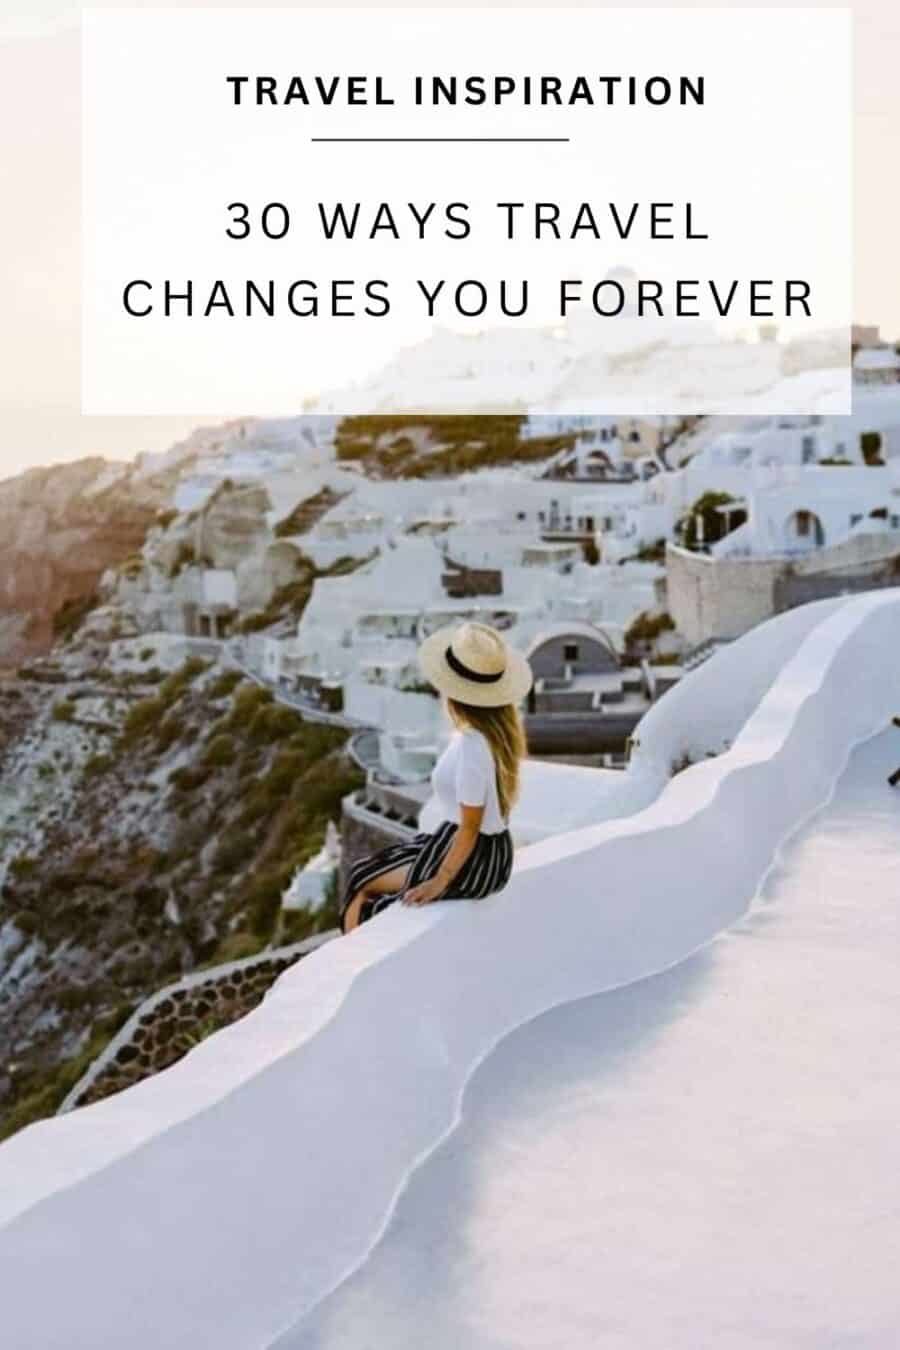 Coco Tran — Aesthetic Travel Blog By Film Photographer Coco Tran https://cocotran.com/how-traveling-changes-you/